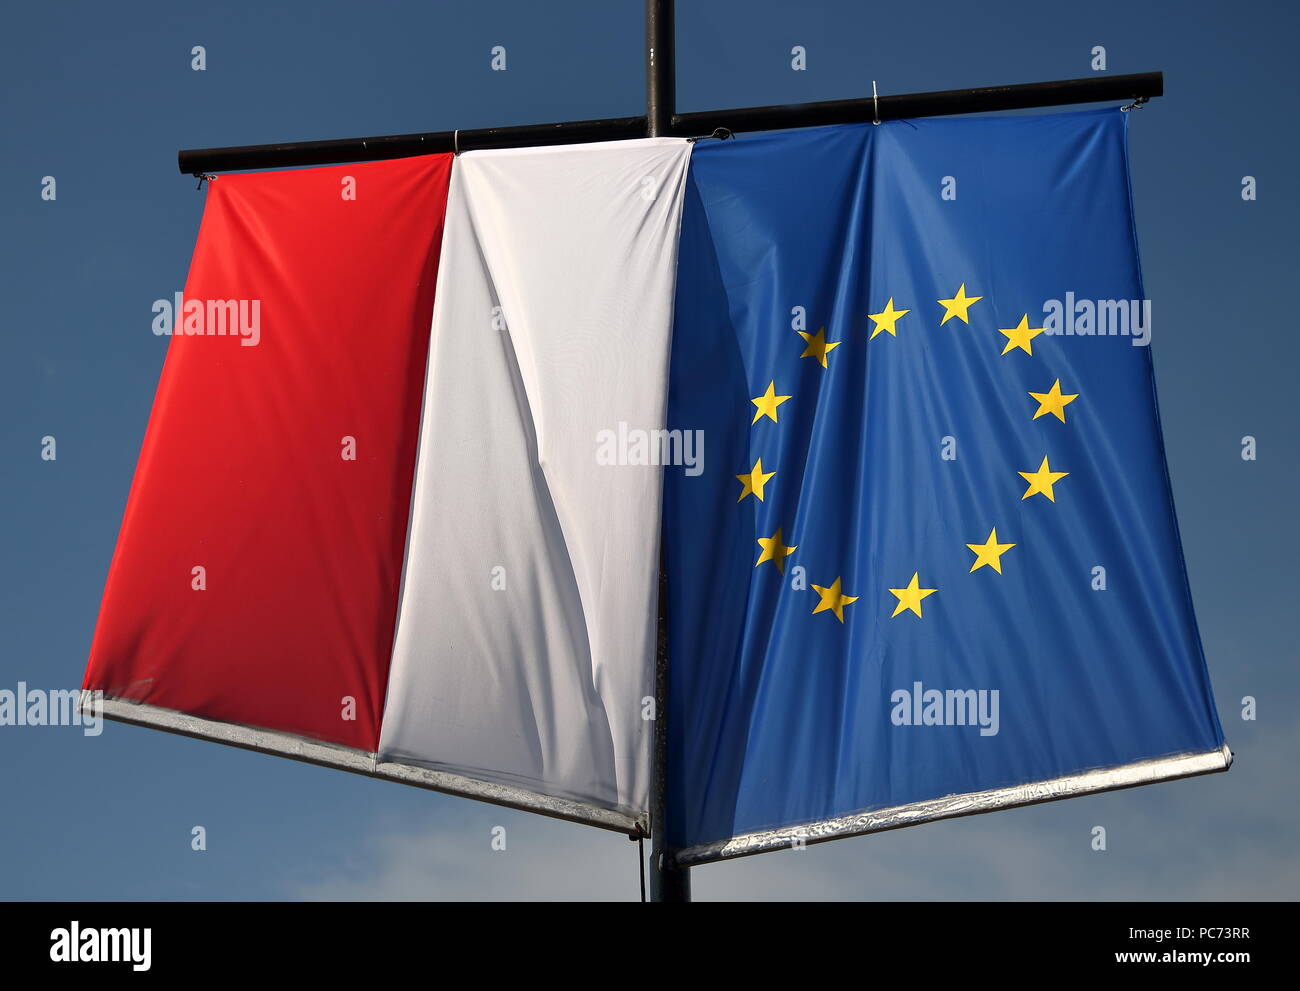 National flag of Poland and flag of European Union hang out together, next to each other, on pole, outdoor, in background blue sky Stock Photo